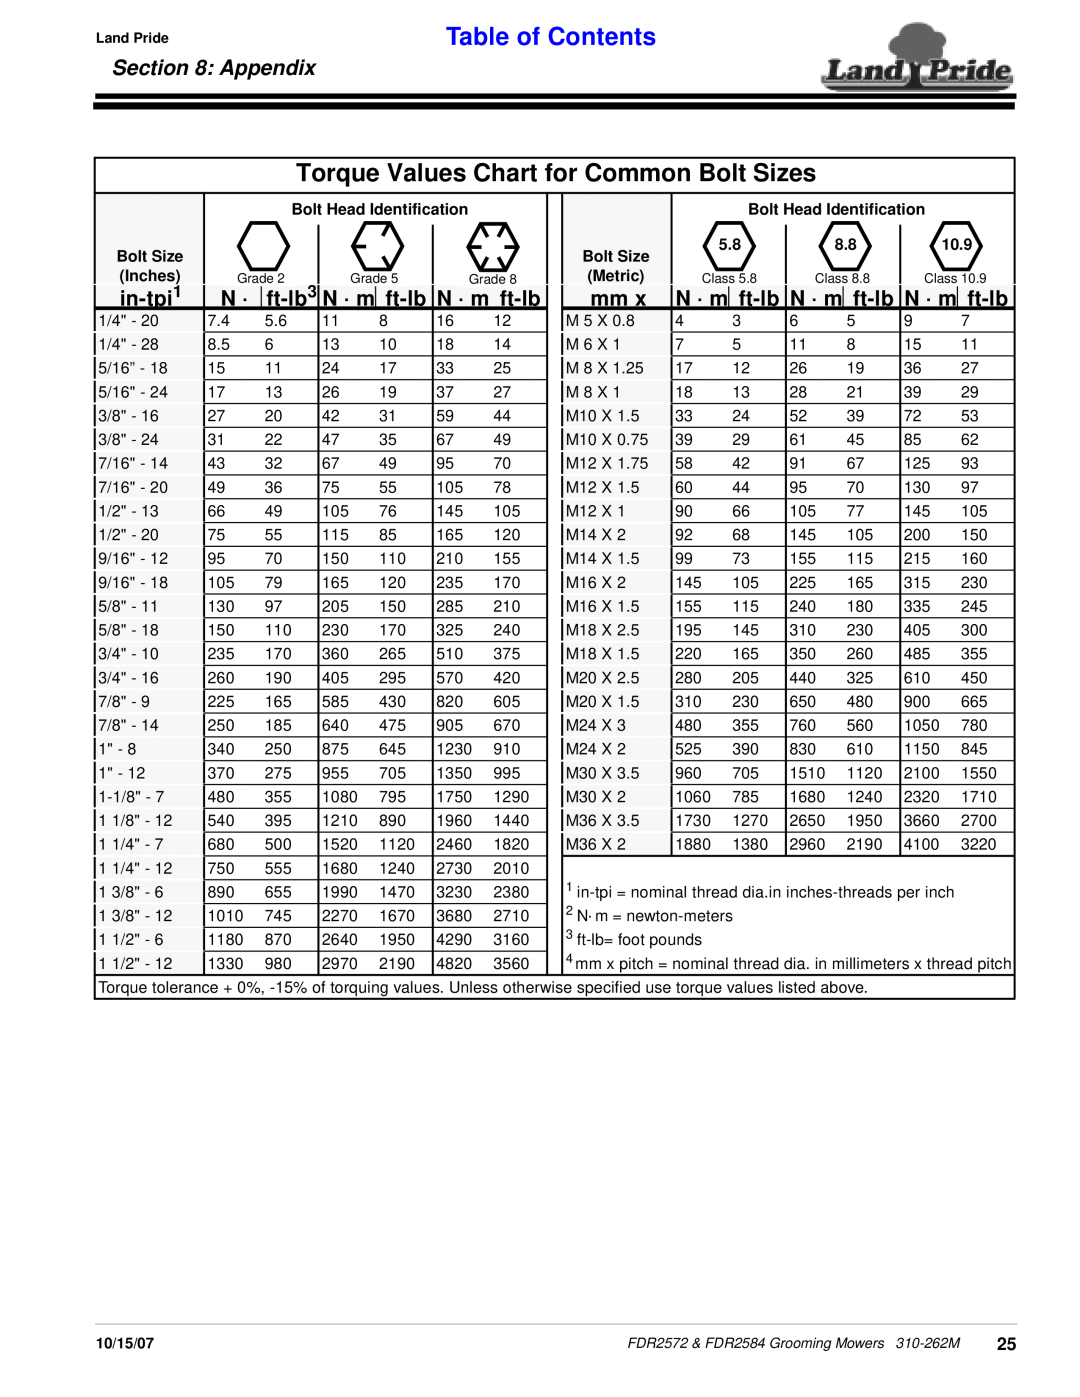 Land Pride FDR2584 Torque Values Chart for Common Bolt Sizes, Appendix, in-tpi1, ft-lb3, · m ft-lb, Table of Contents 